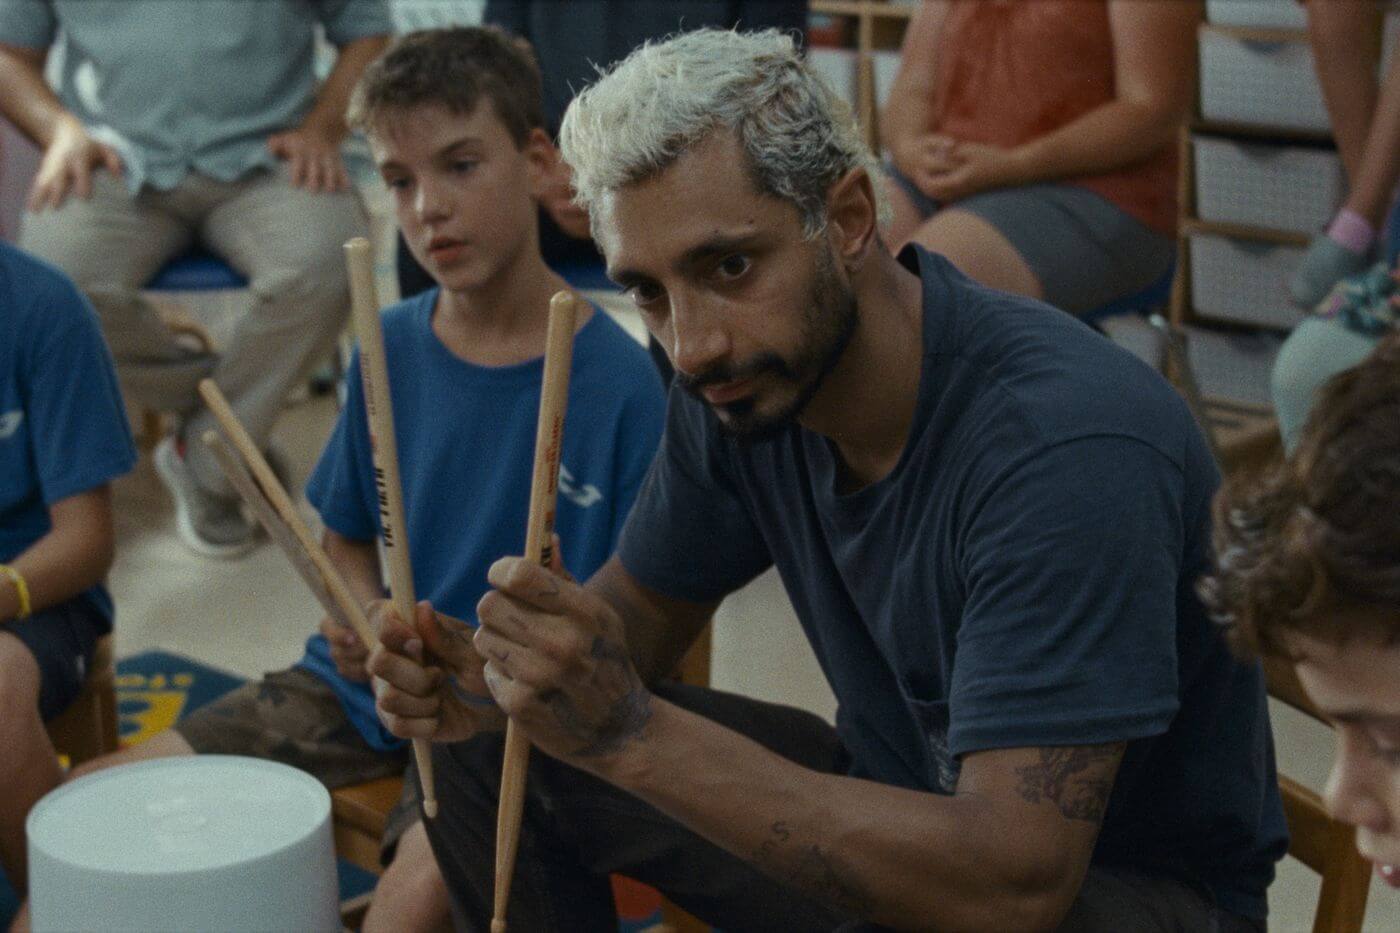 Riz Ahmed with bleached hair is sitting holding drum sticks. Next to him is young deaf students